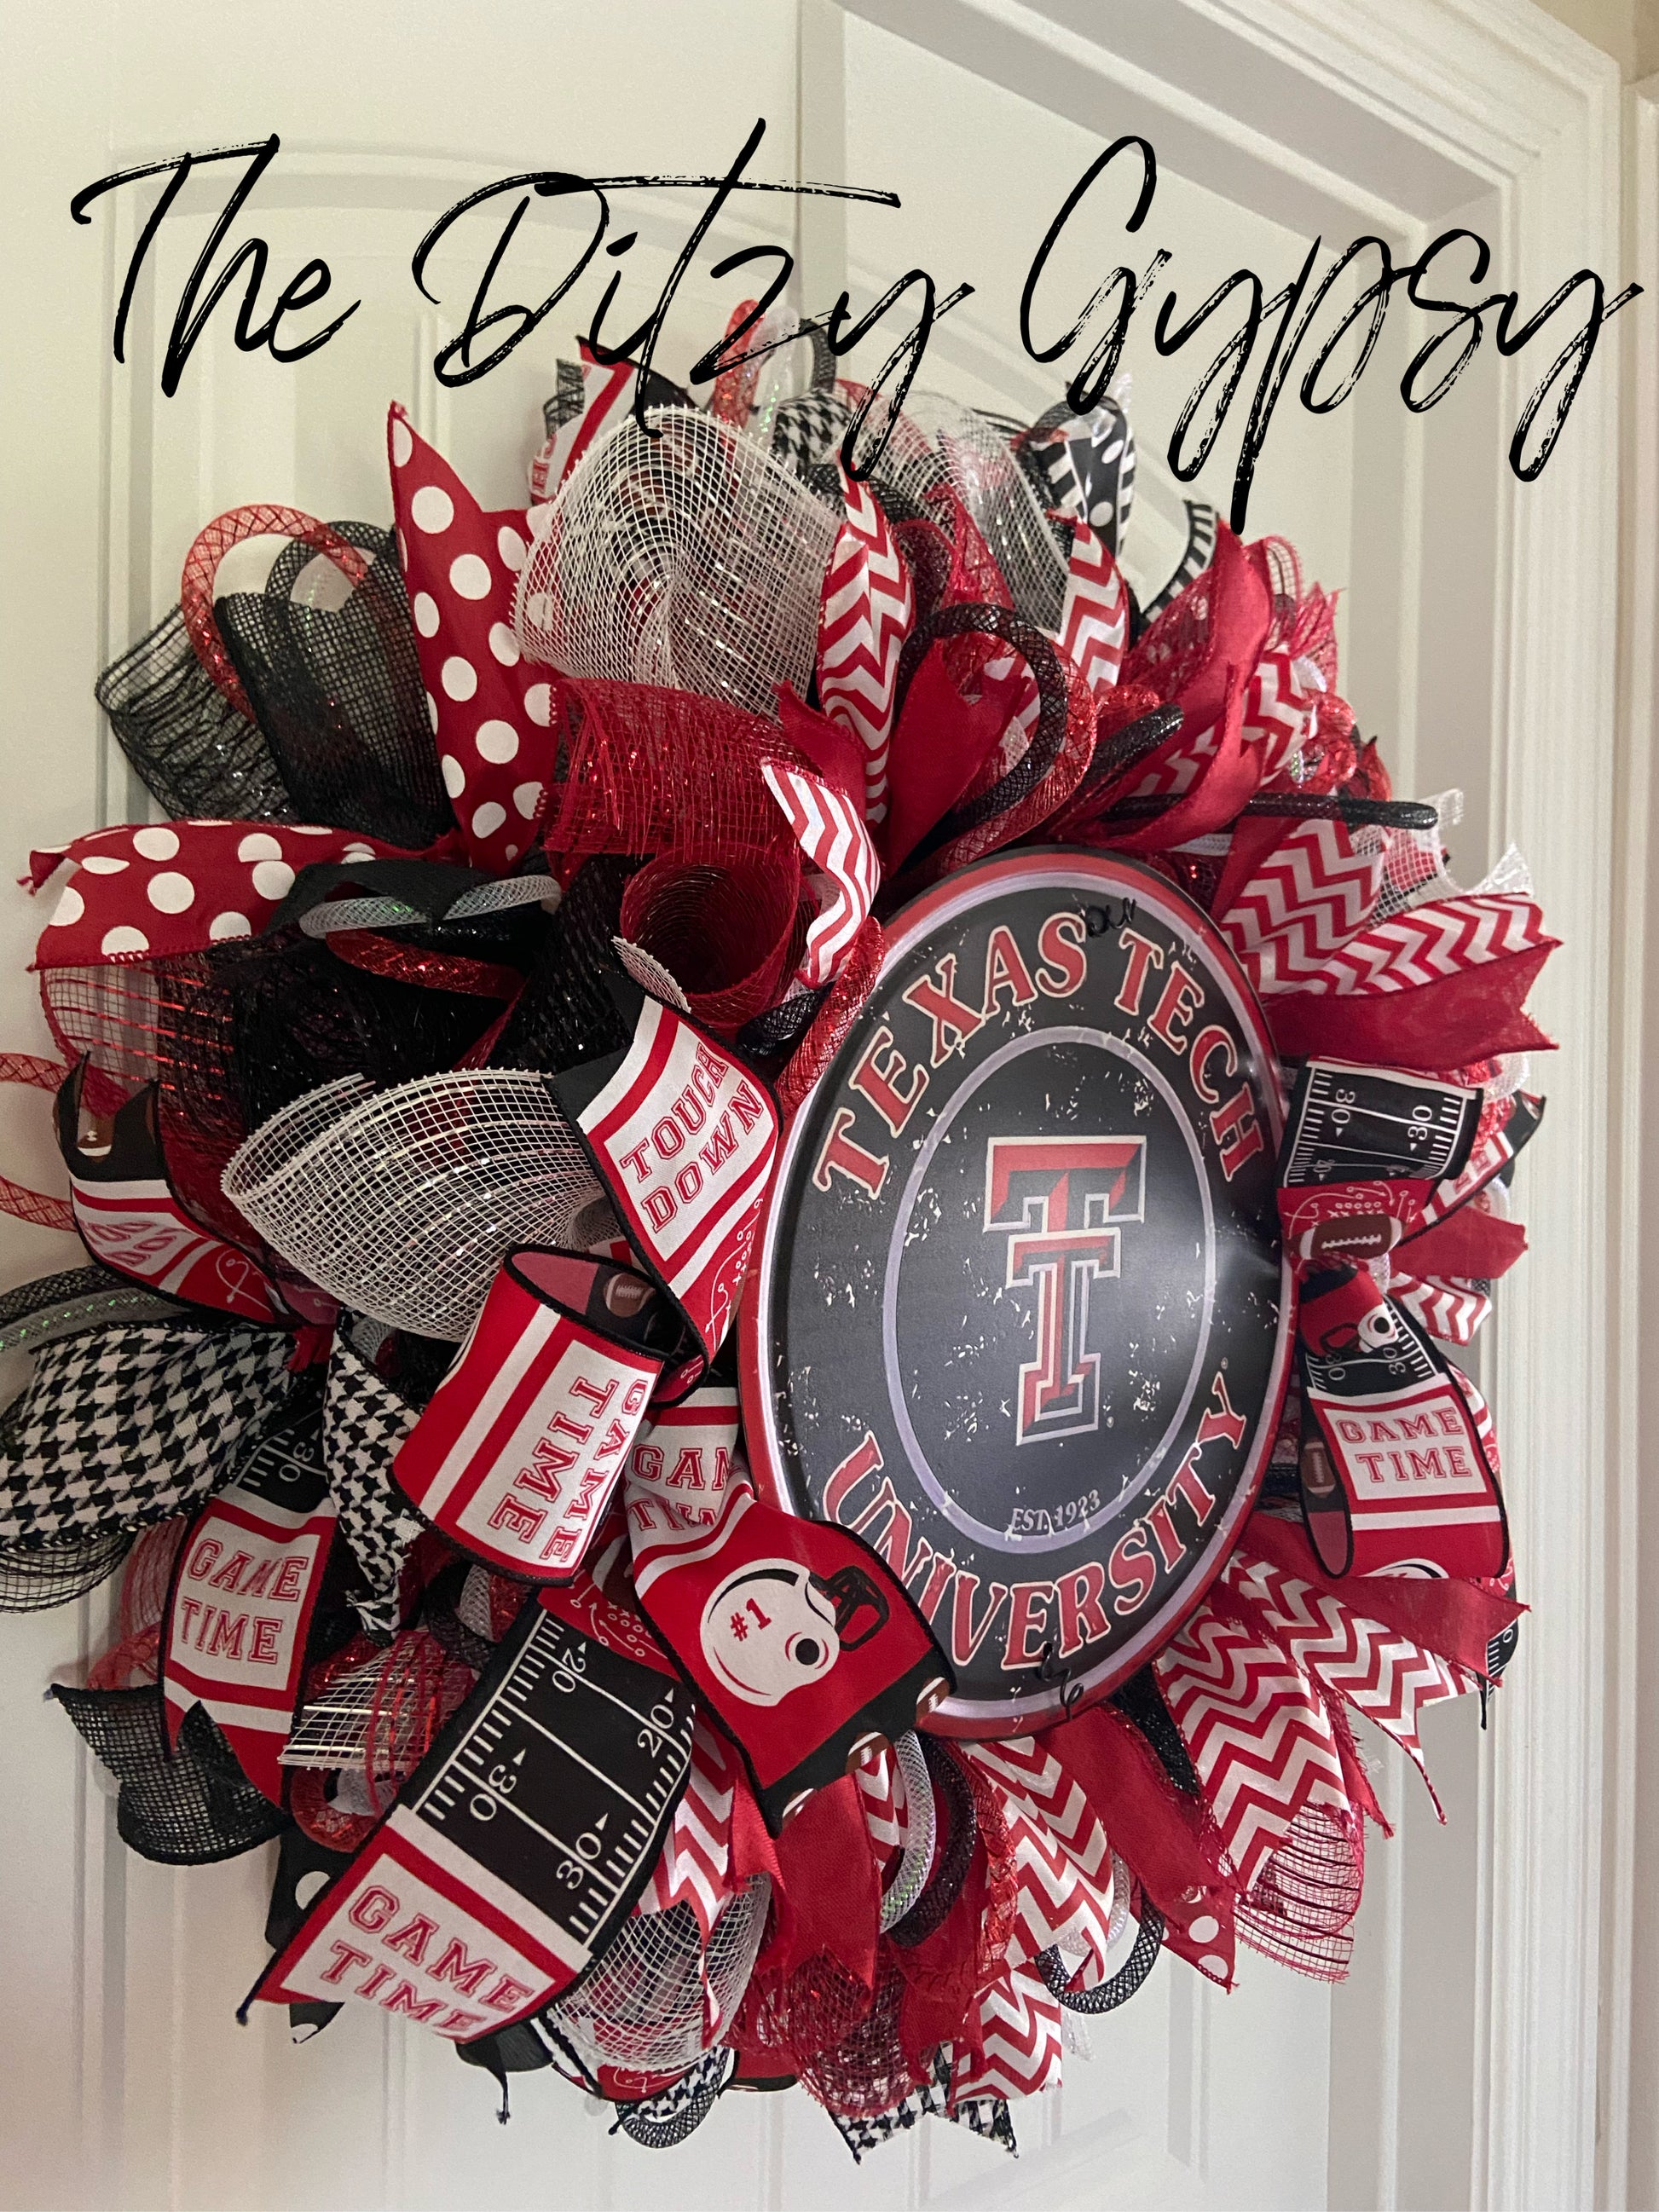 Red, White and Blue Ribbon Wreath – The Ditzy Gypsy, LLC